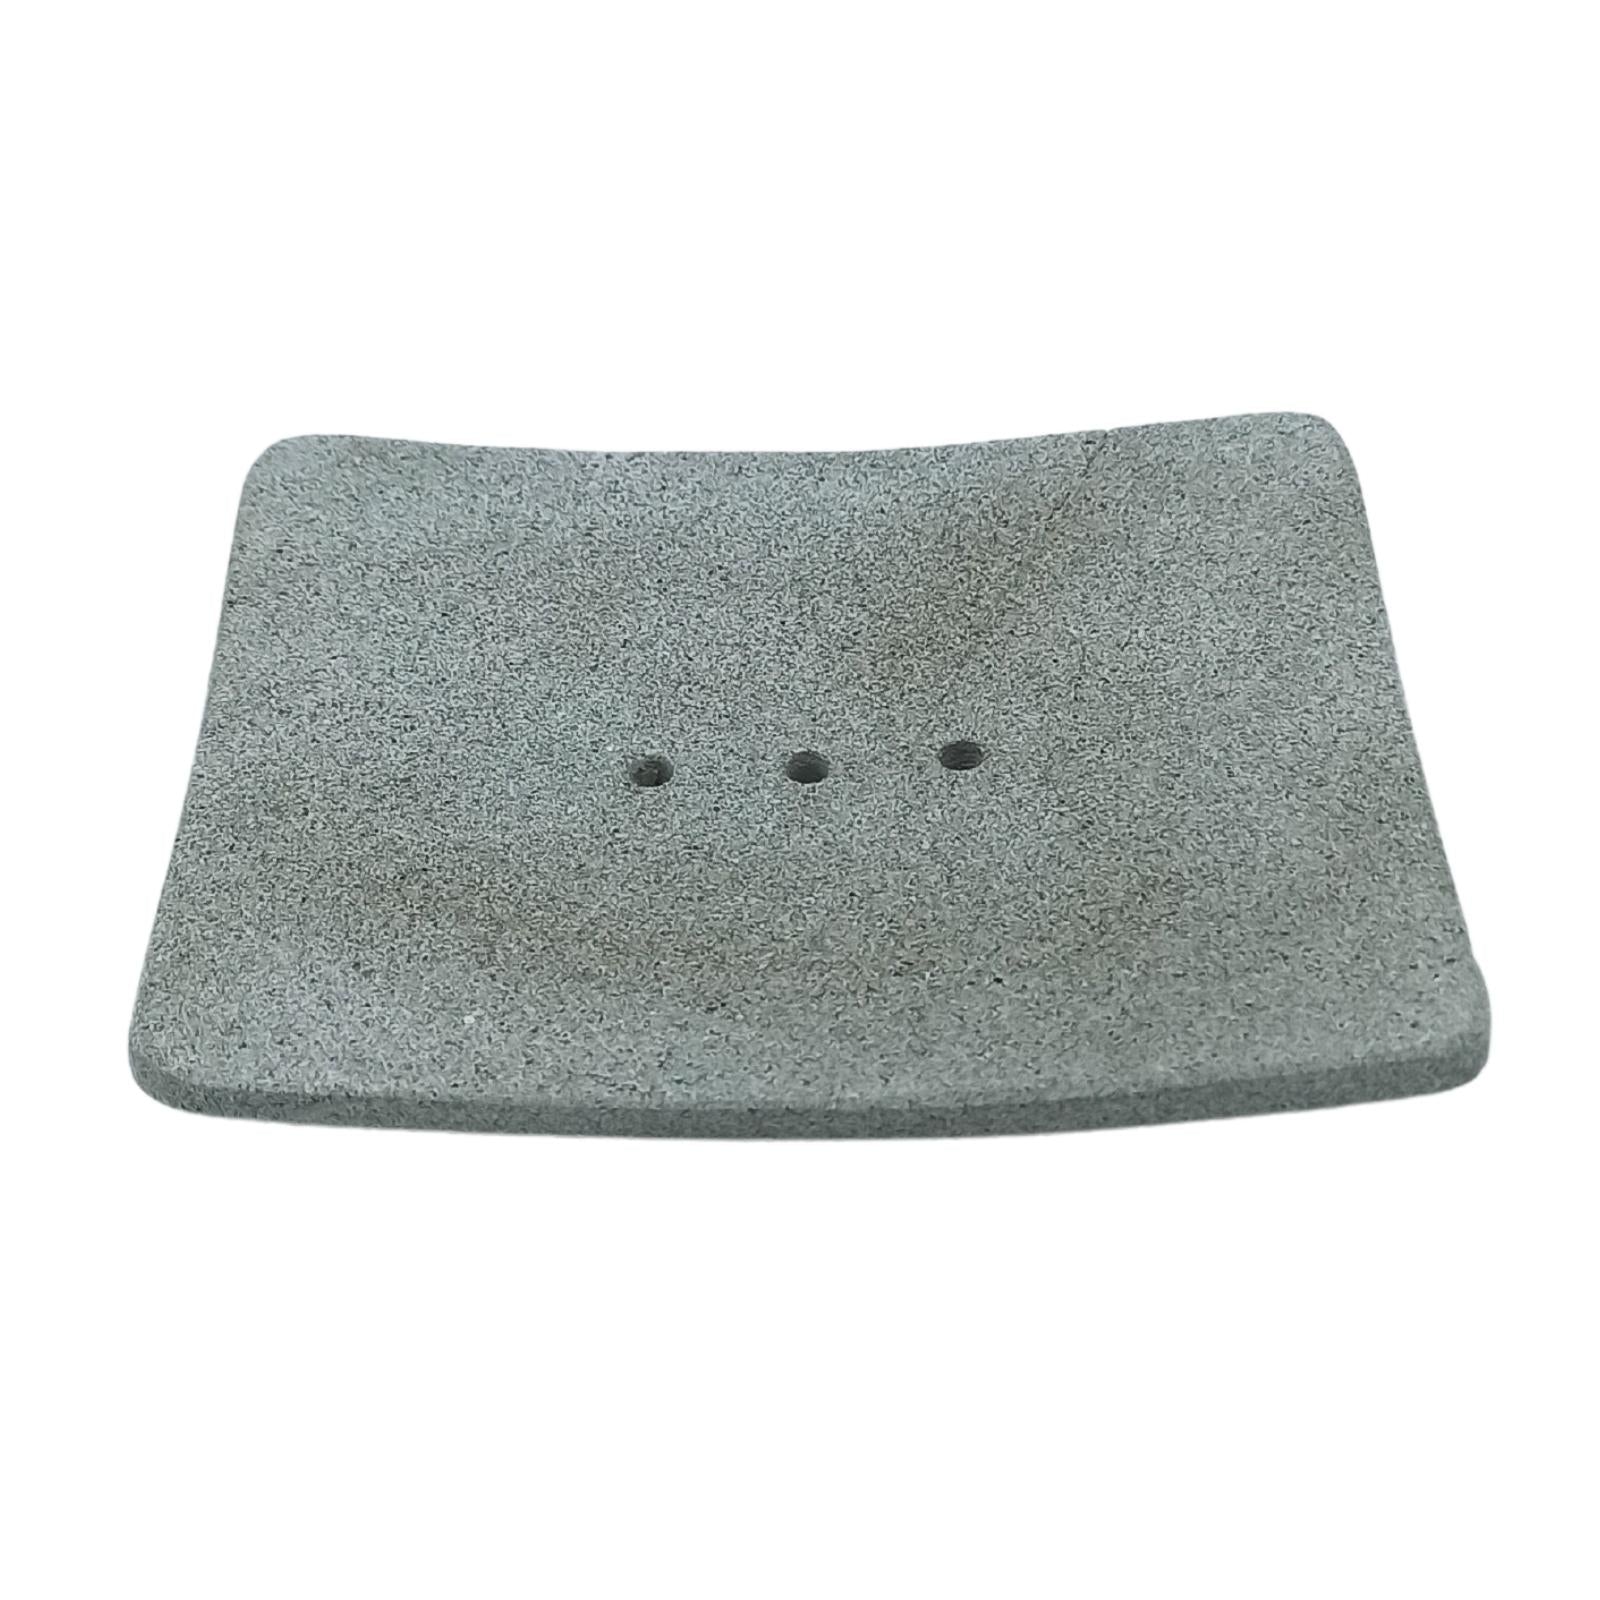 View Square Shaped Ziolit Stone Soap Dish information